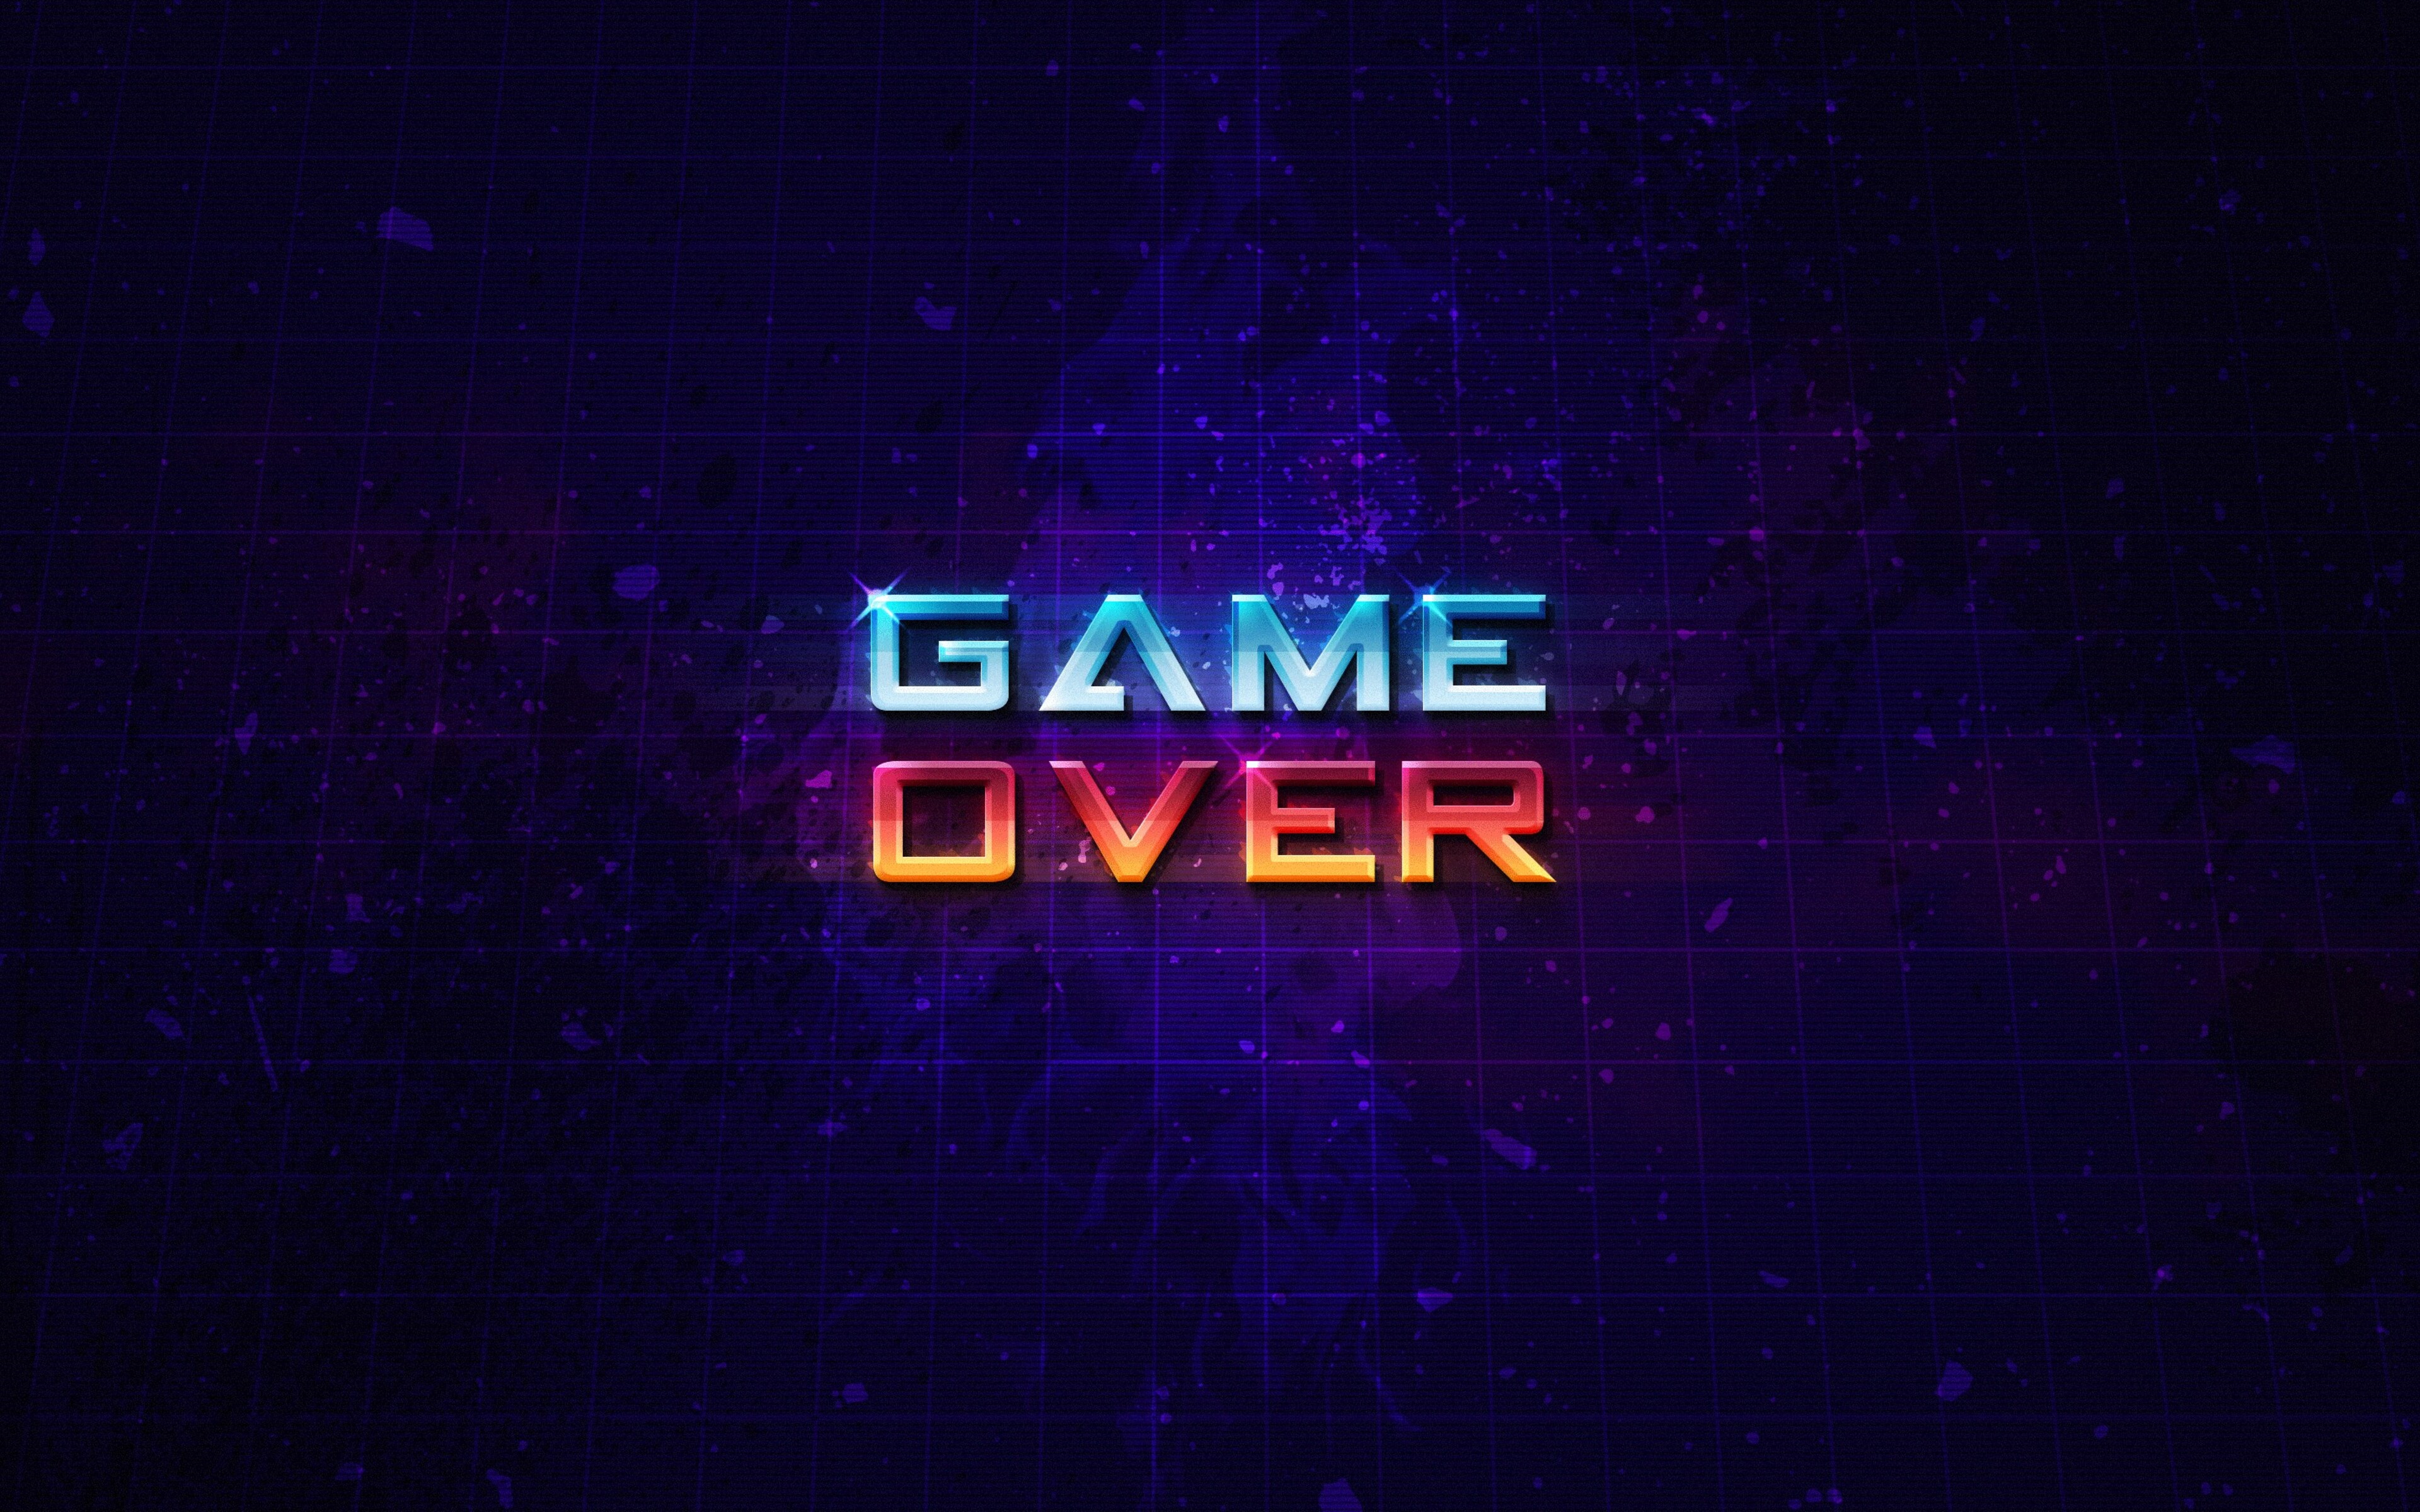 All over a game. Game over. Фон гейм овер. Game over в игре. Game over картинка.